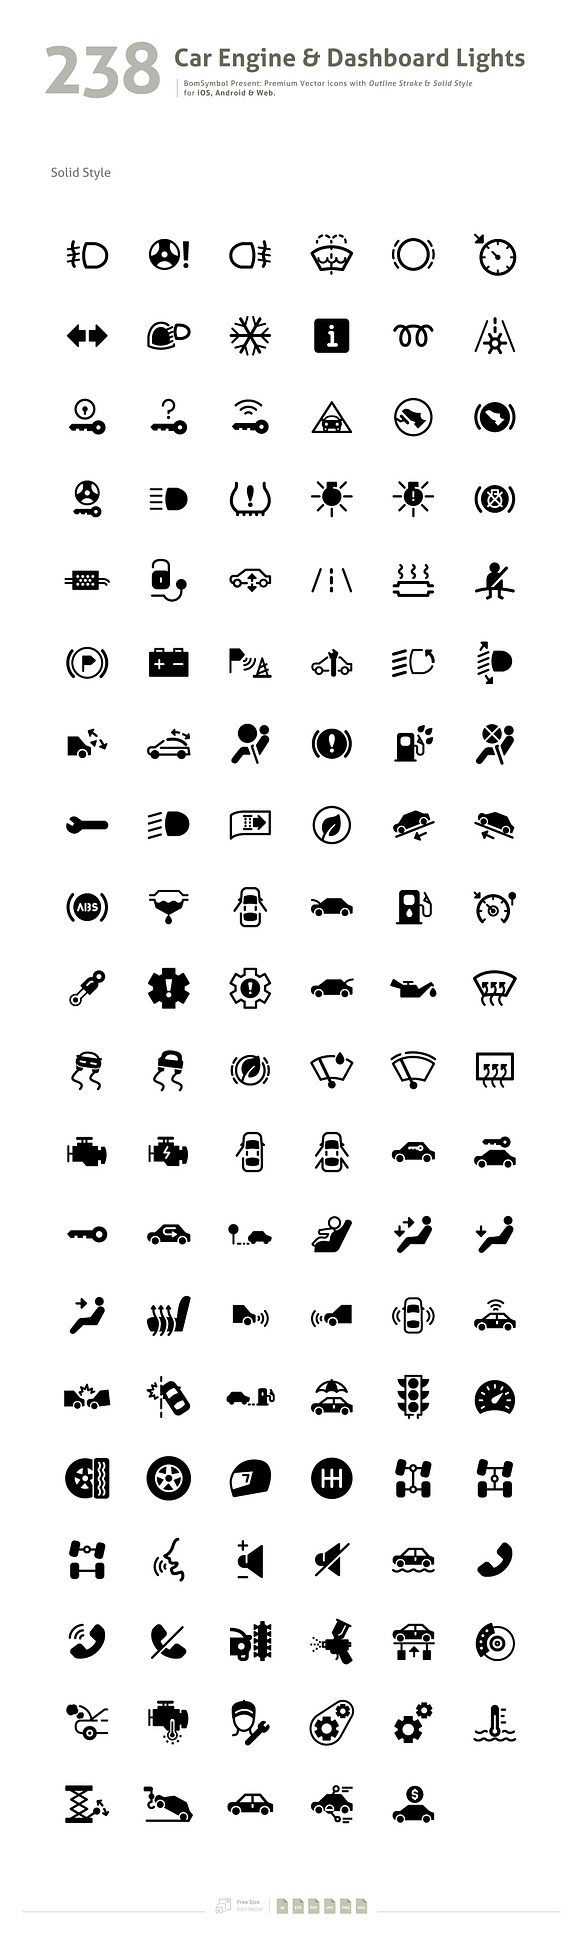 Car Engine & Dashboard Lights Symbol in Car Dashboard Icons - product preview 2